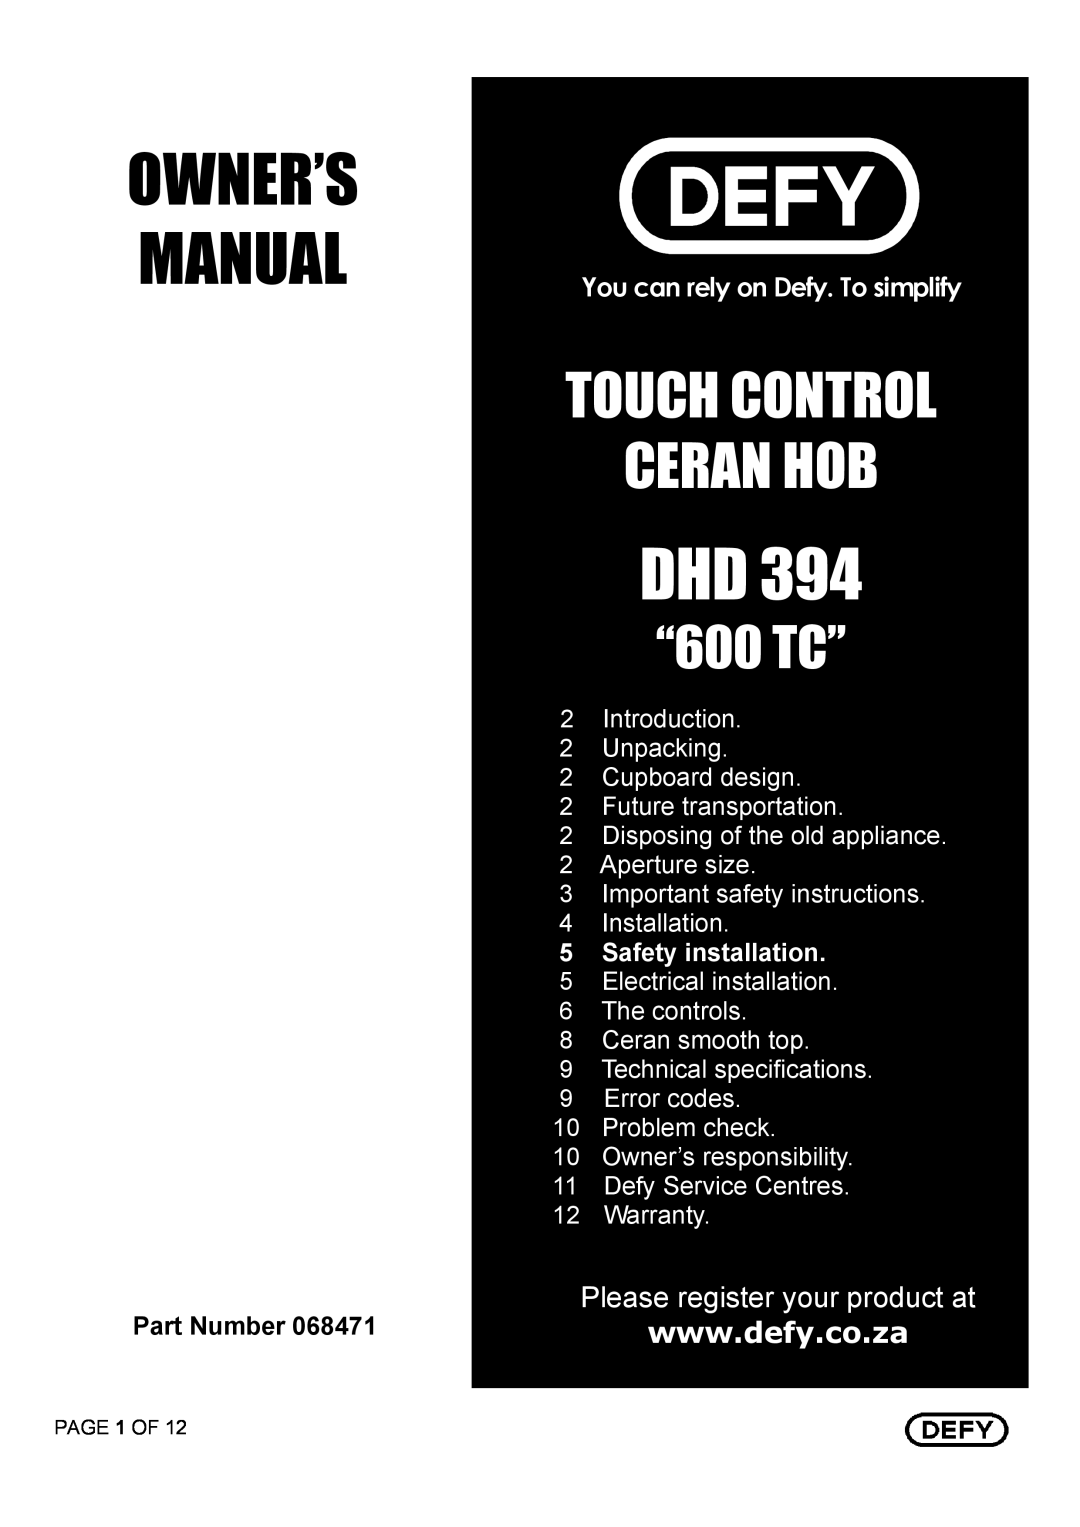 Defy Appliances DHD 394 owner manual Touch Control Ceran Hob, “600 TC”, Please register your product at, Part Number 